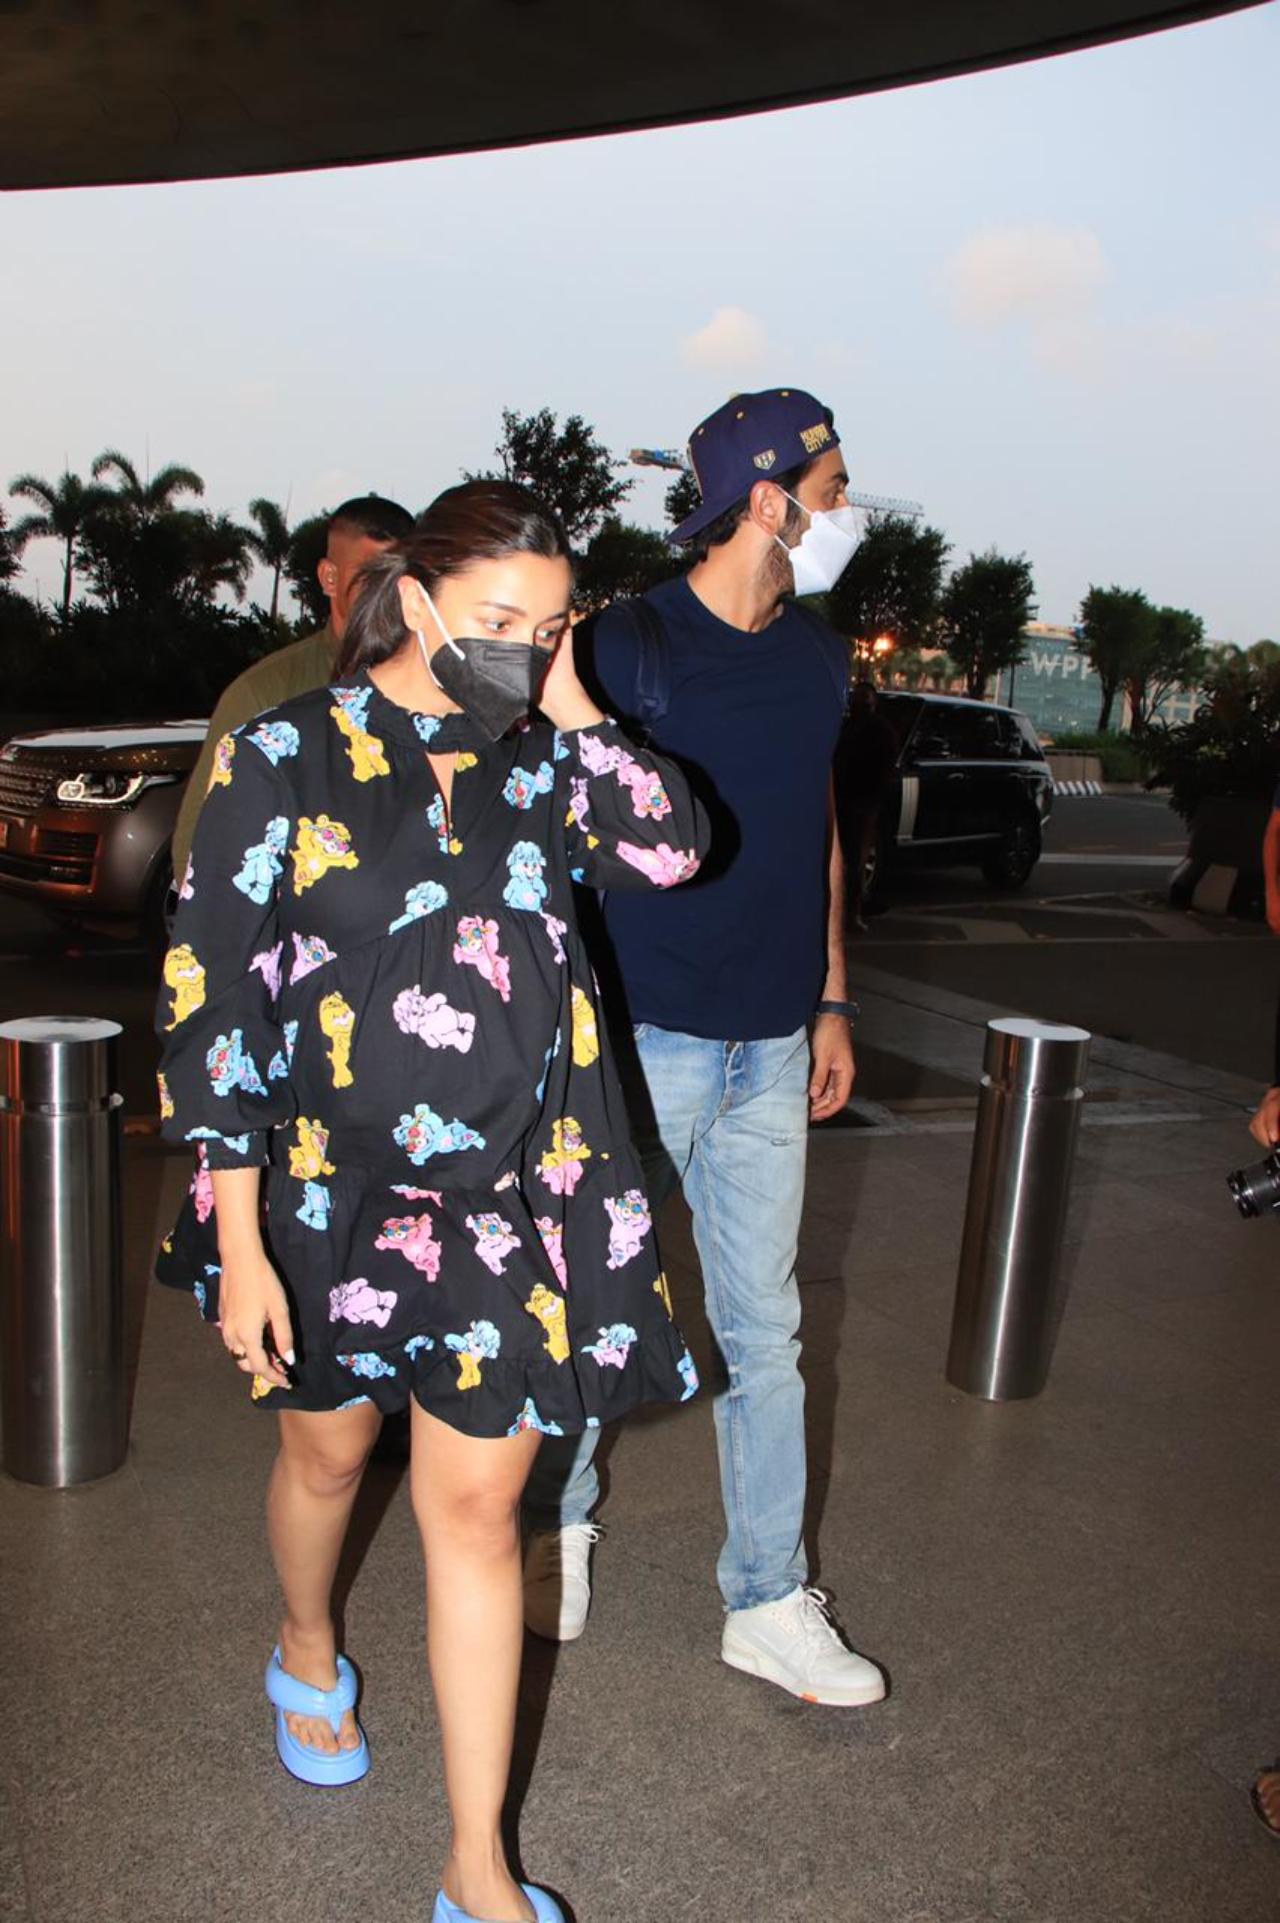 Parents-to-be Alia and Ranbir were seen arriving together at Mumbai airport on Thursday night. The couple also posed for the paparazzi before they headed into the airport